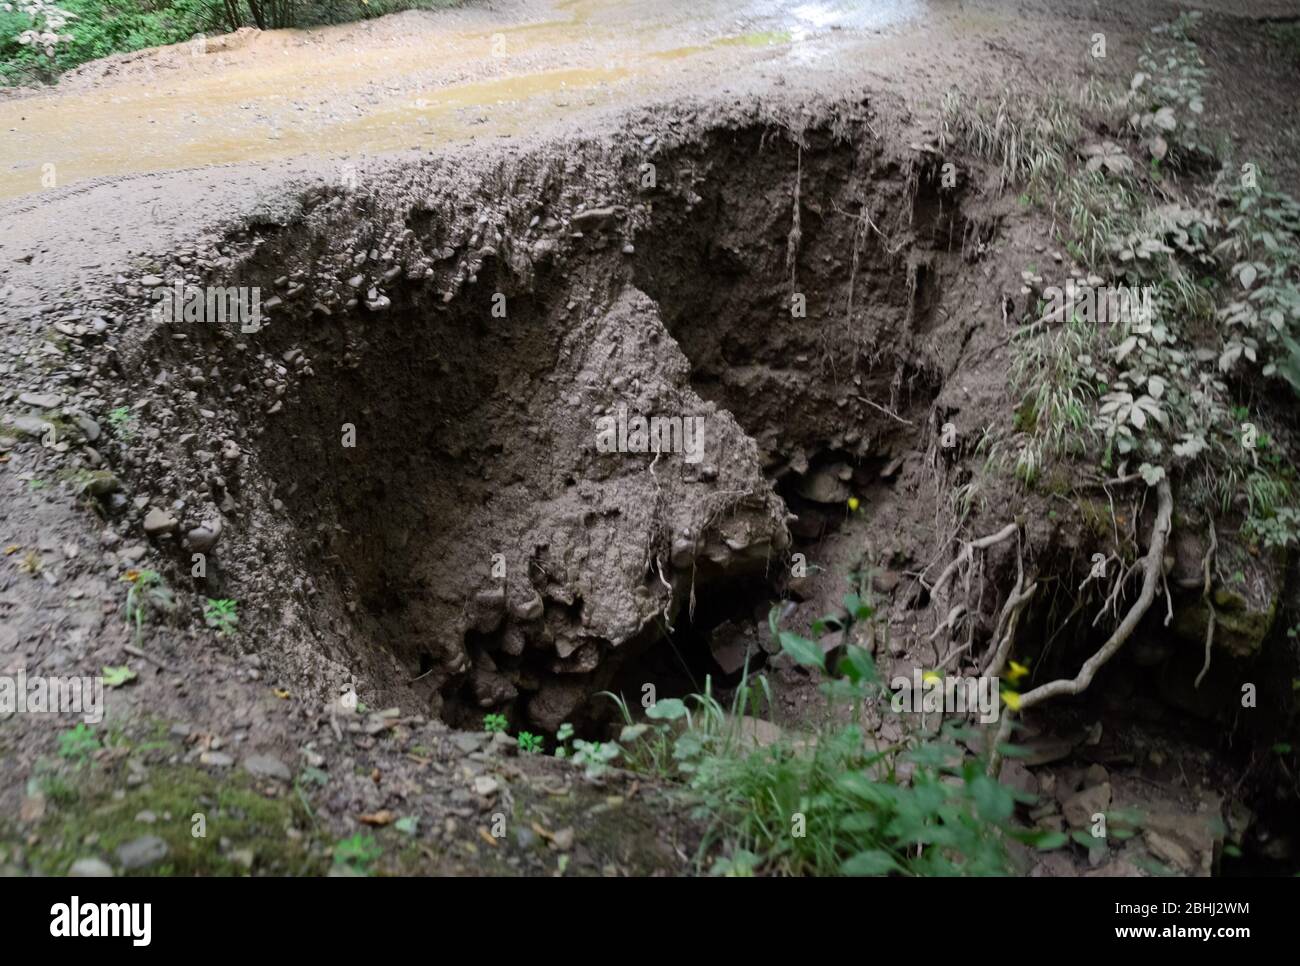 The collapsed edge of the road from the rain. Akyduct for water runoff. Stock Photo